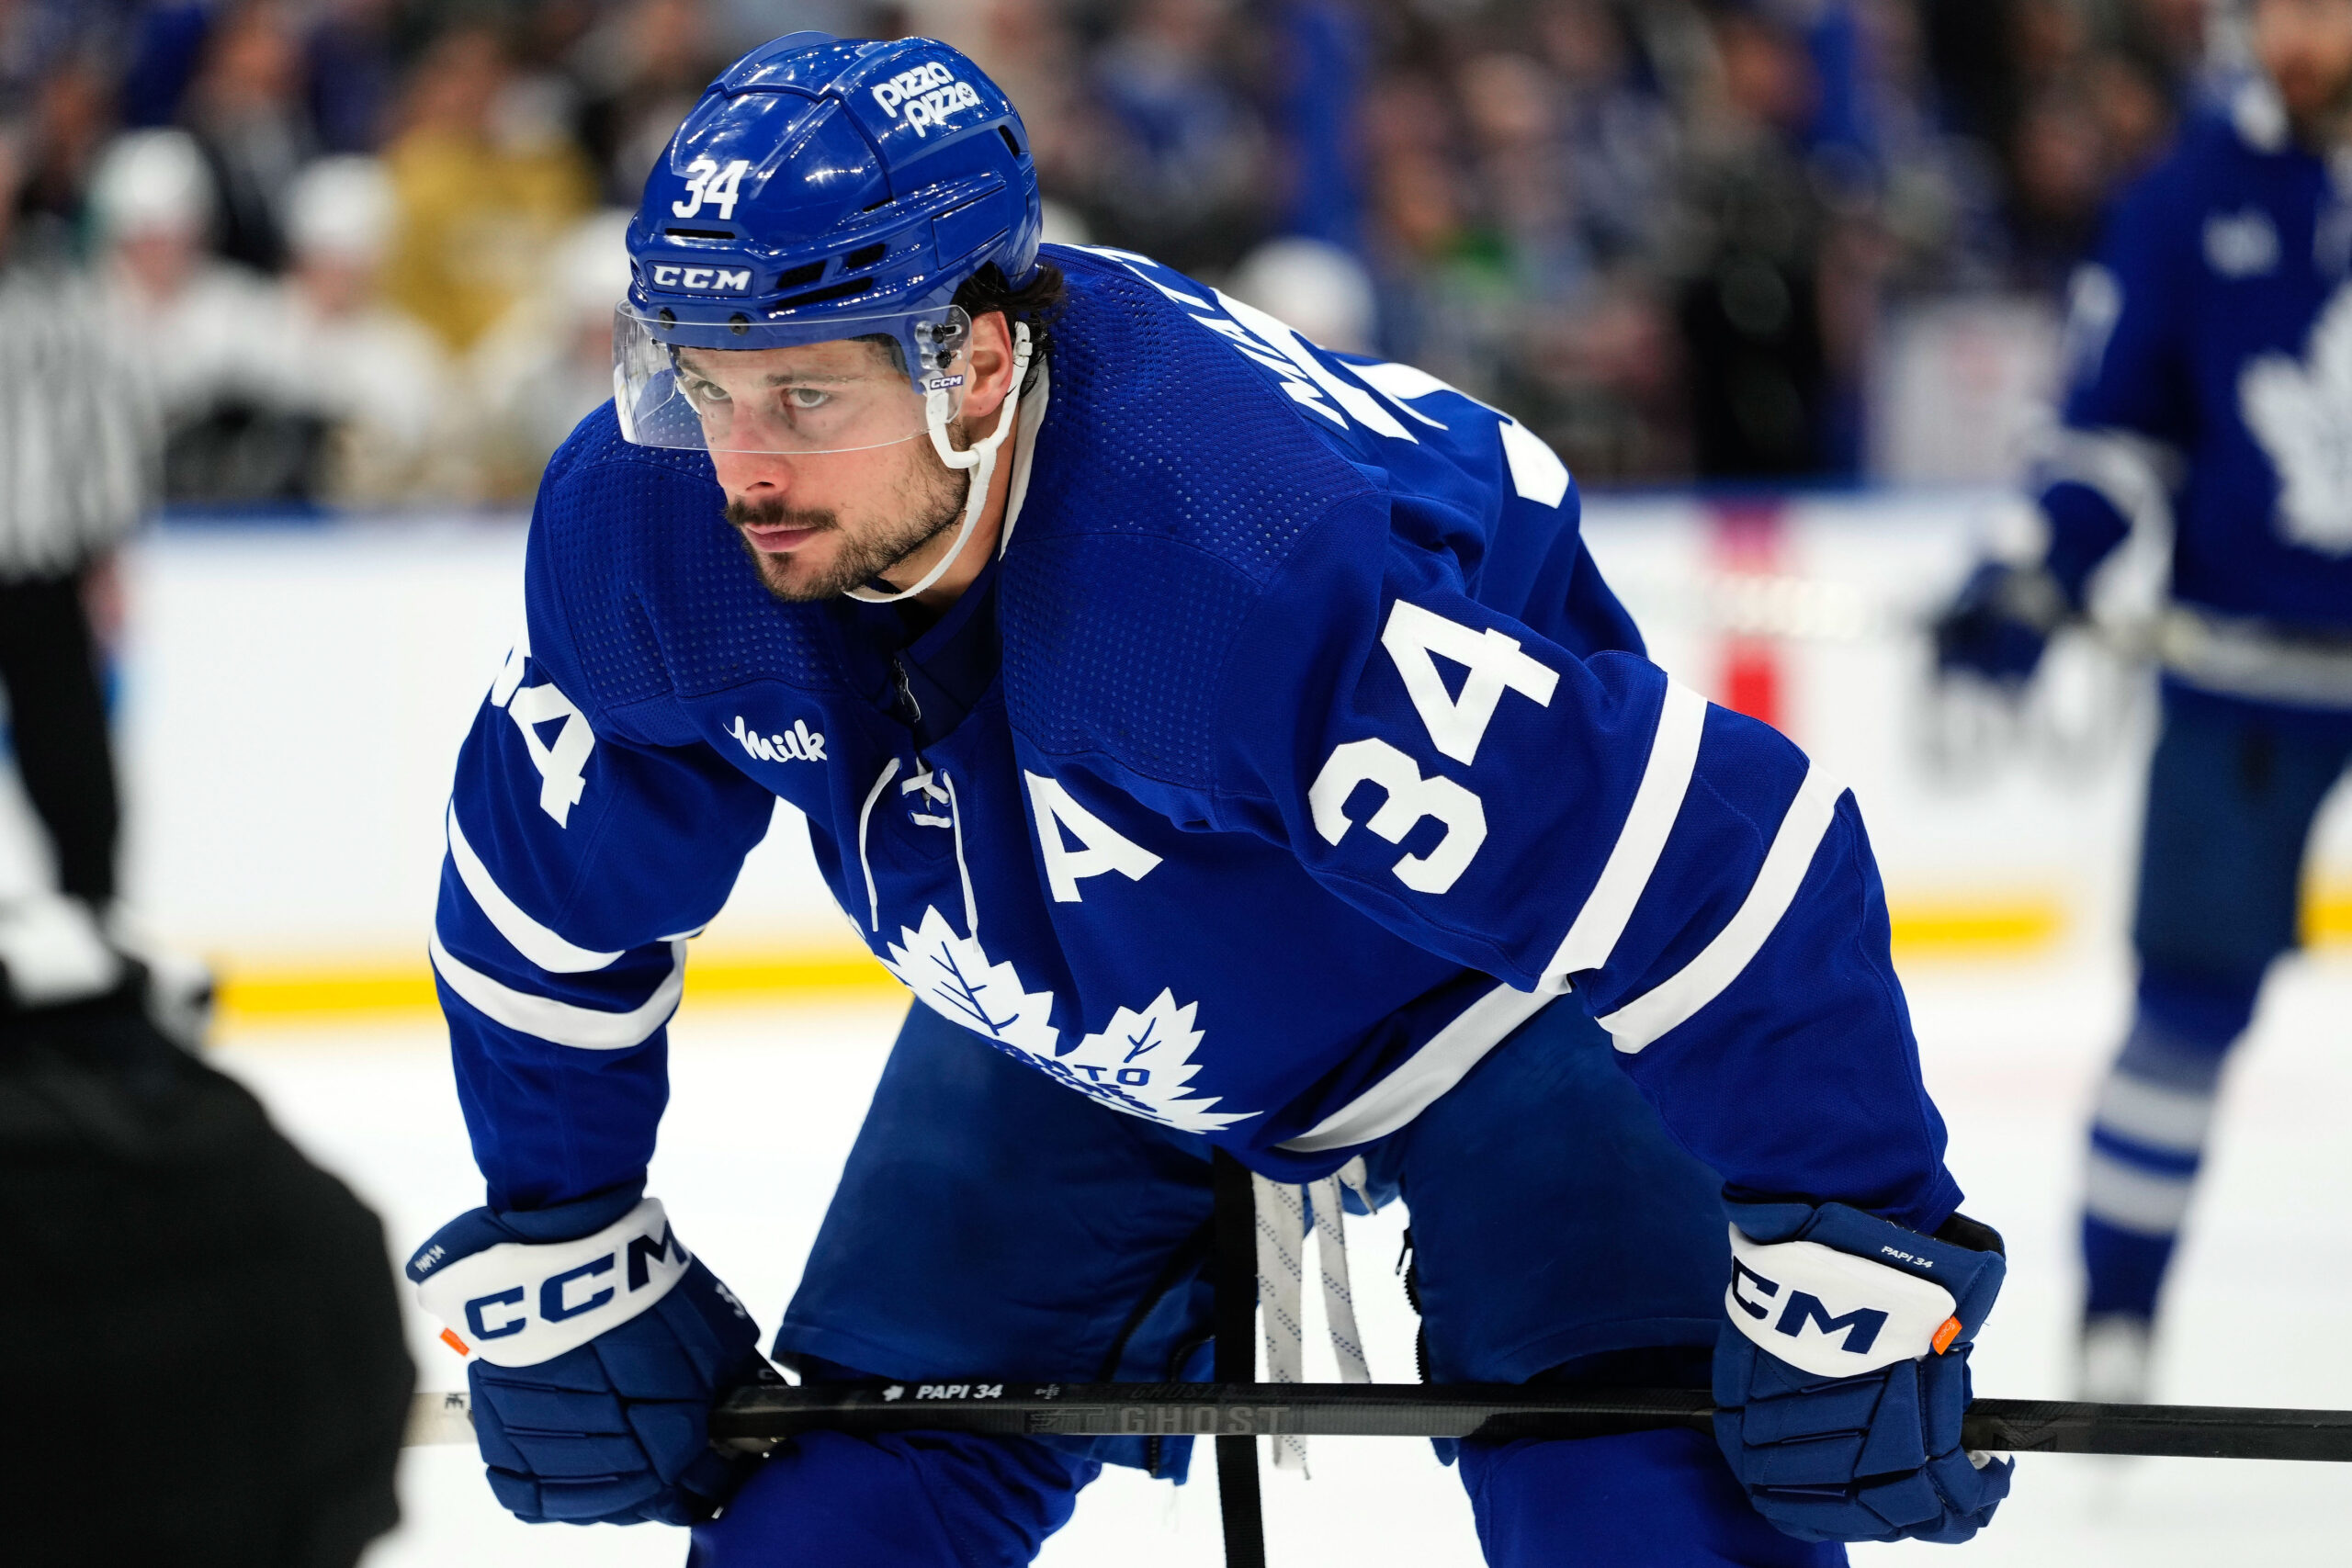 Two Crucial Toronto Maple Leaf Game 7 vs Bruins Lineup Updates